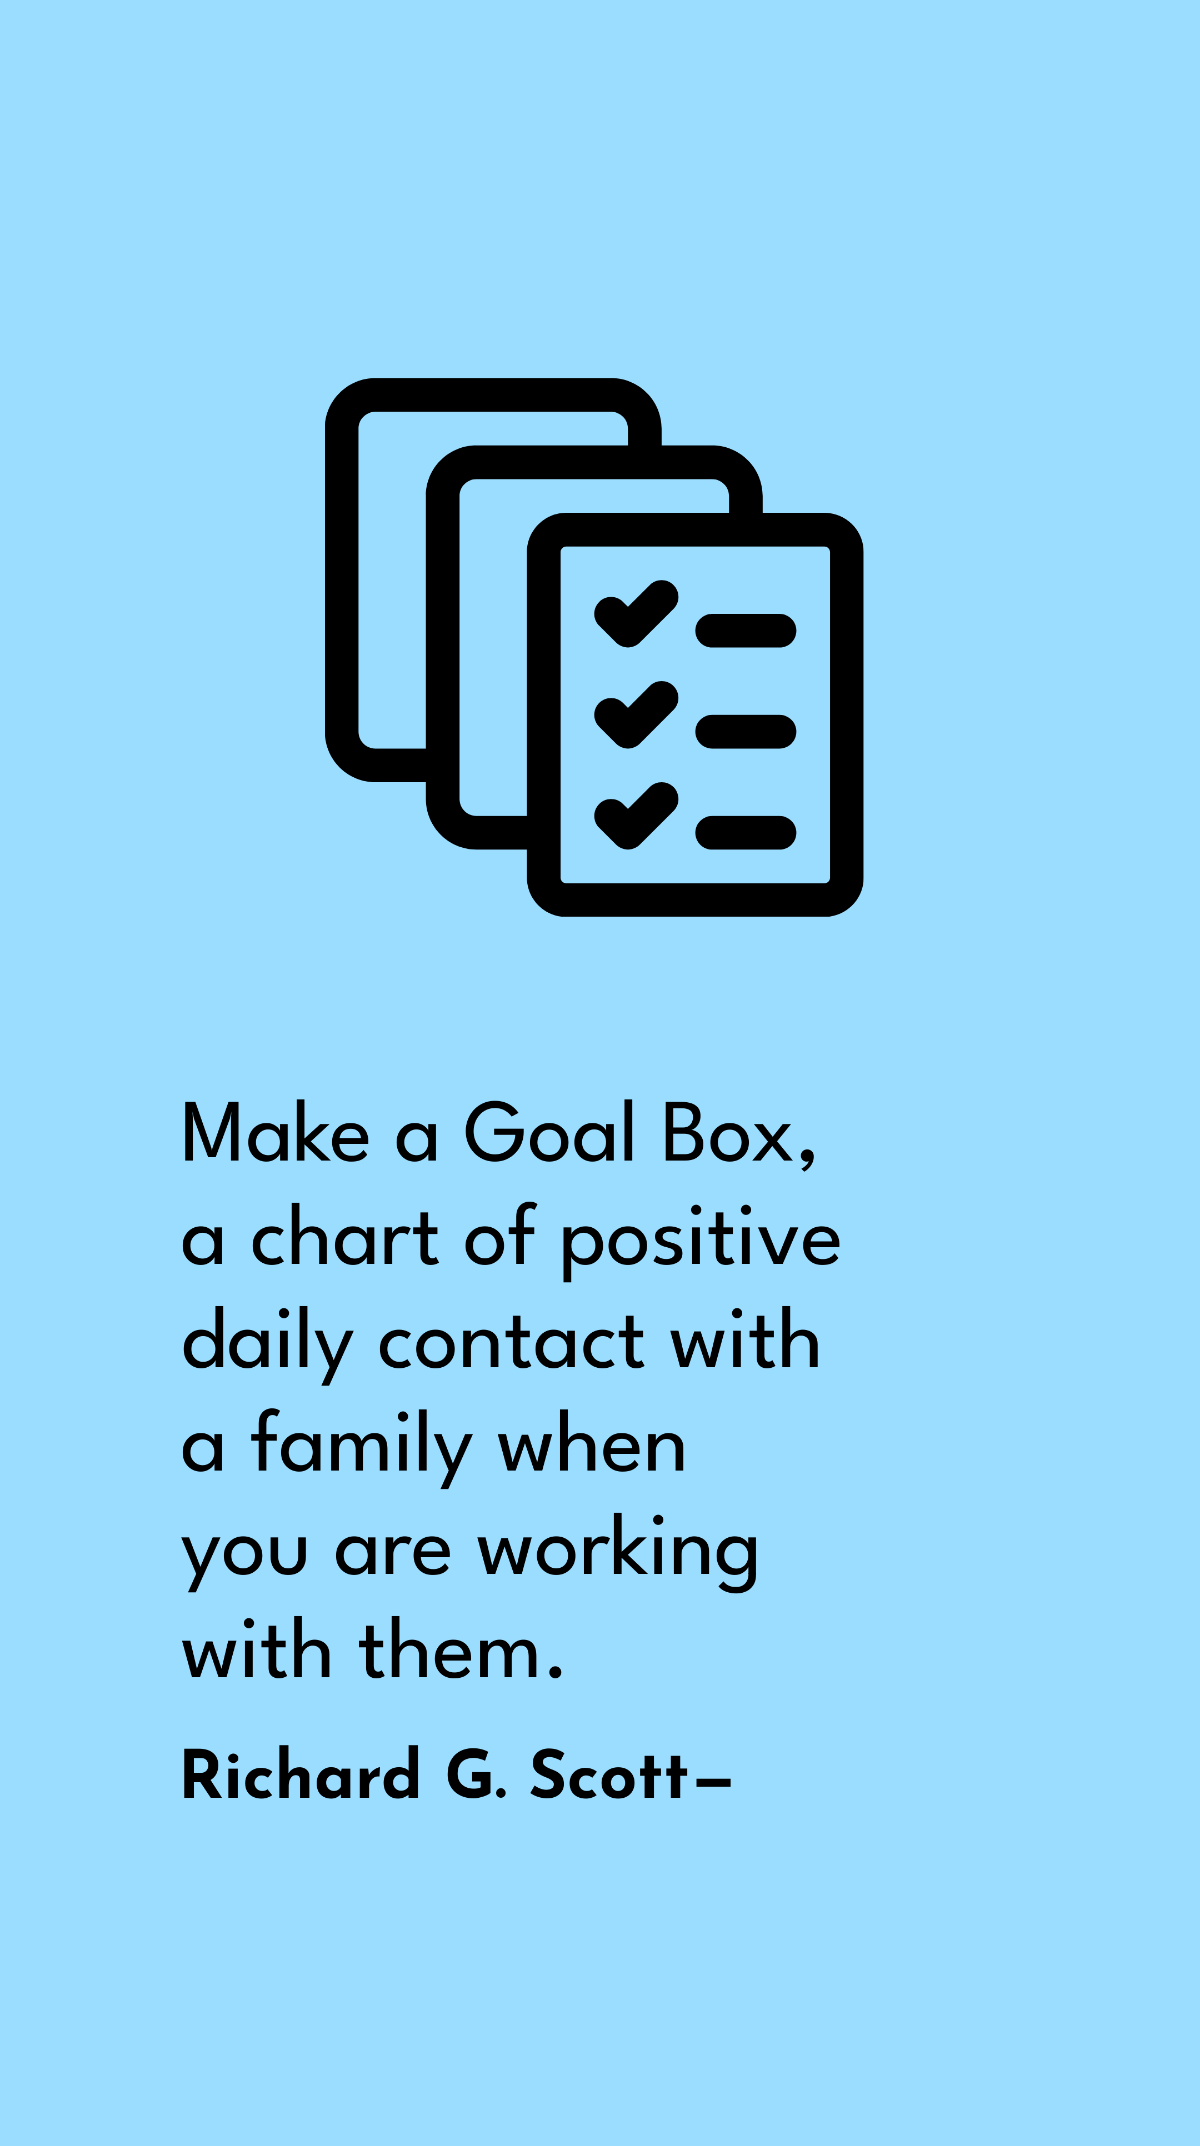 Free Richard G. Scott - Make a Goal Box, a chart of positive daily contact with a family when you are working with them. Template